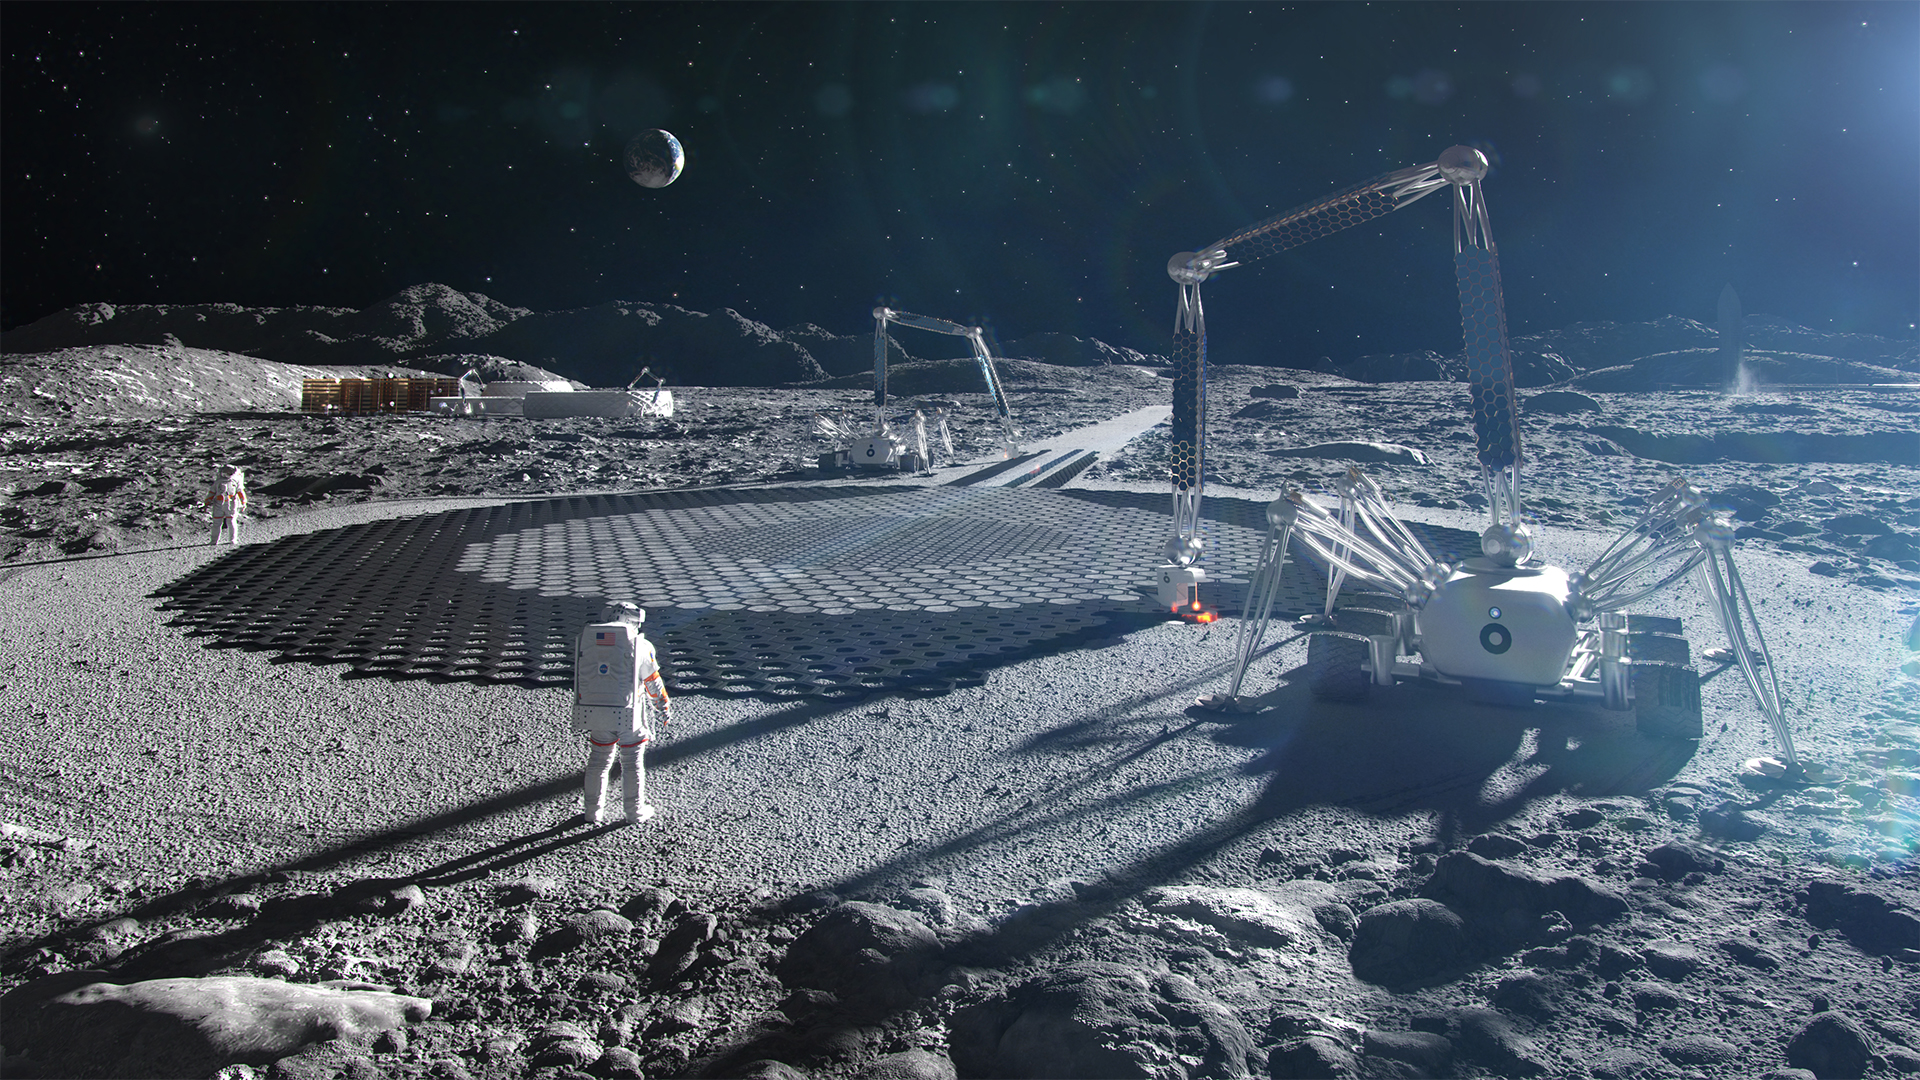 Company that 3D-printed Army barracks wants to build habitats on the Moon